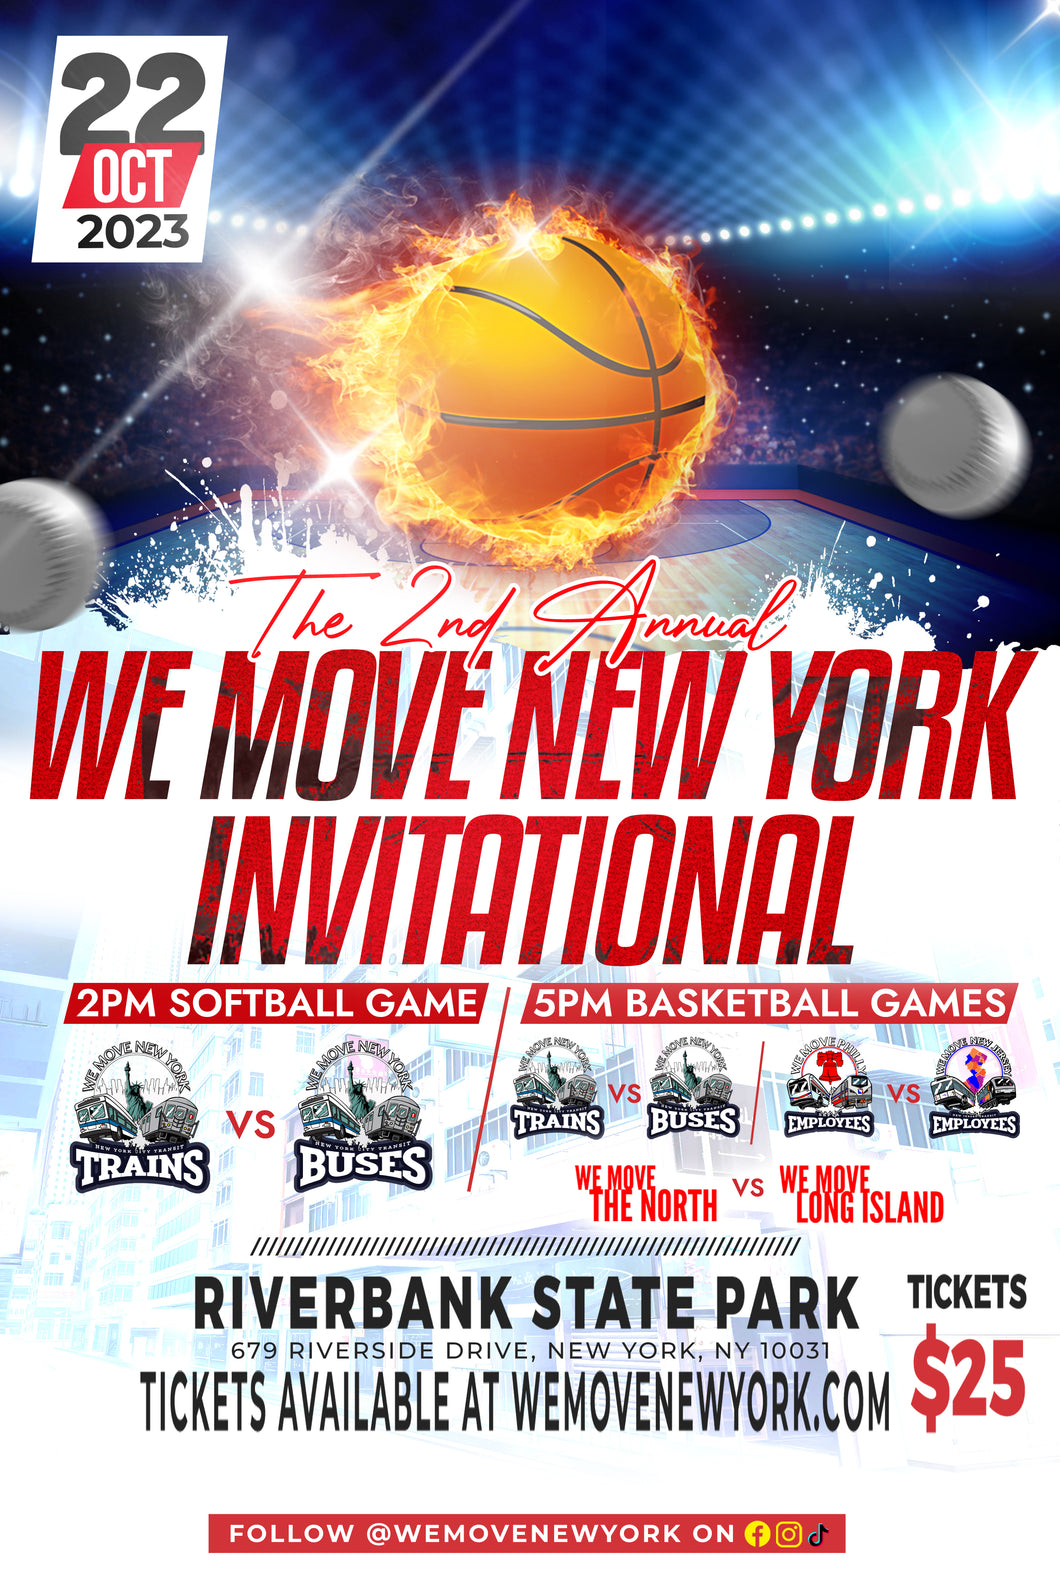 The 2nd Annual We Move New York Invitational